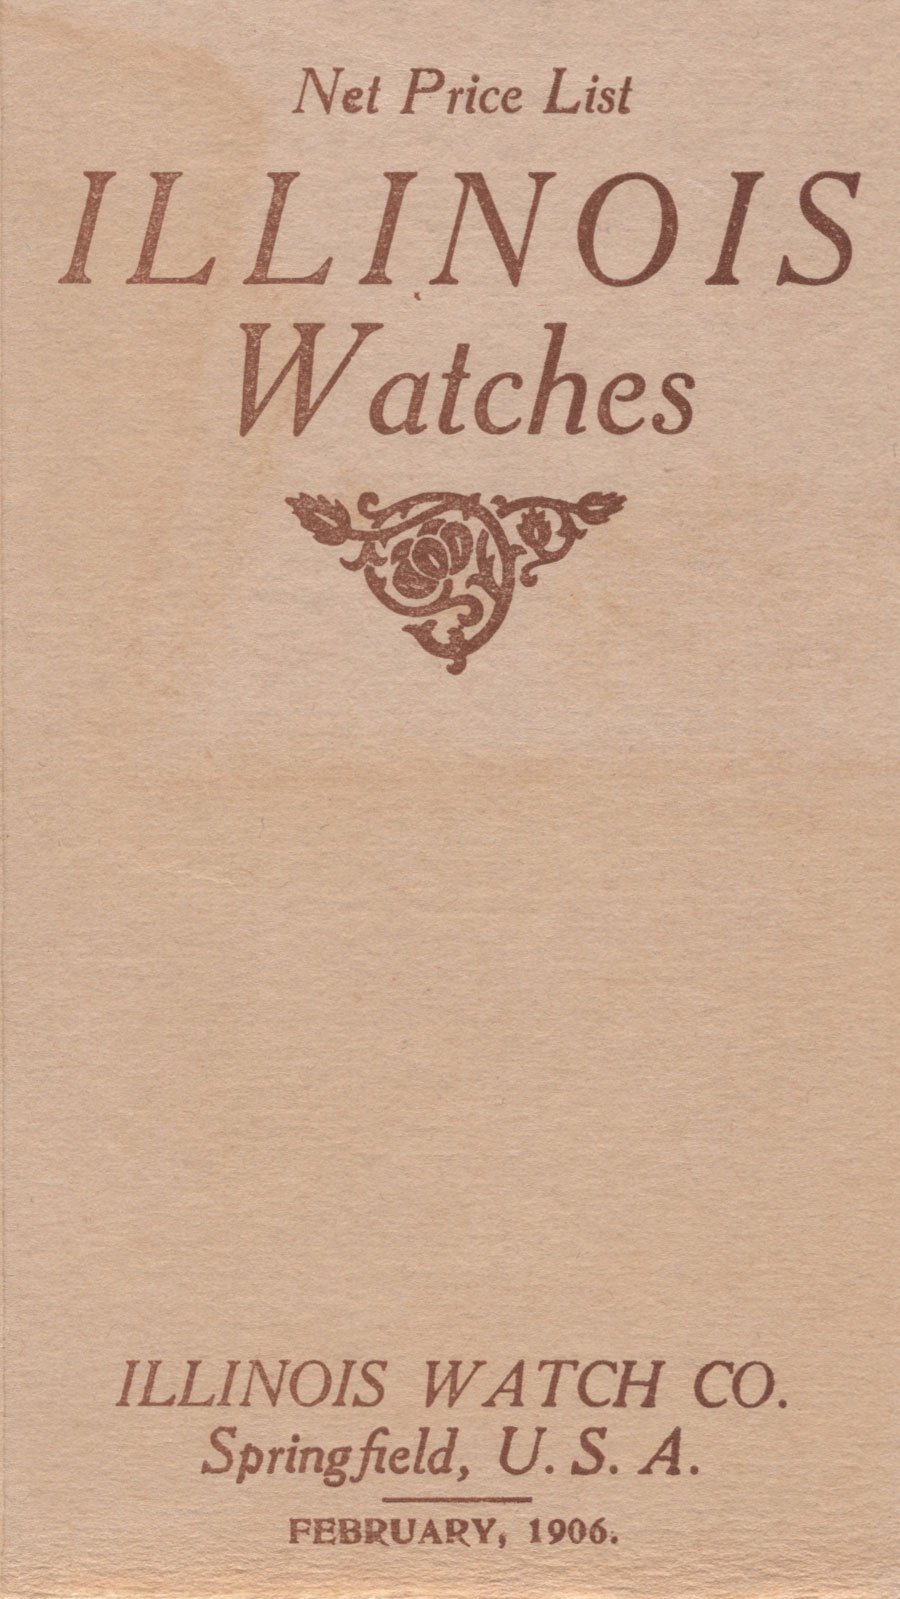 Net Price List Illinois Watches Catalog: February 1906 Cover Image